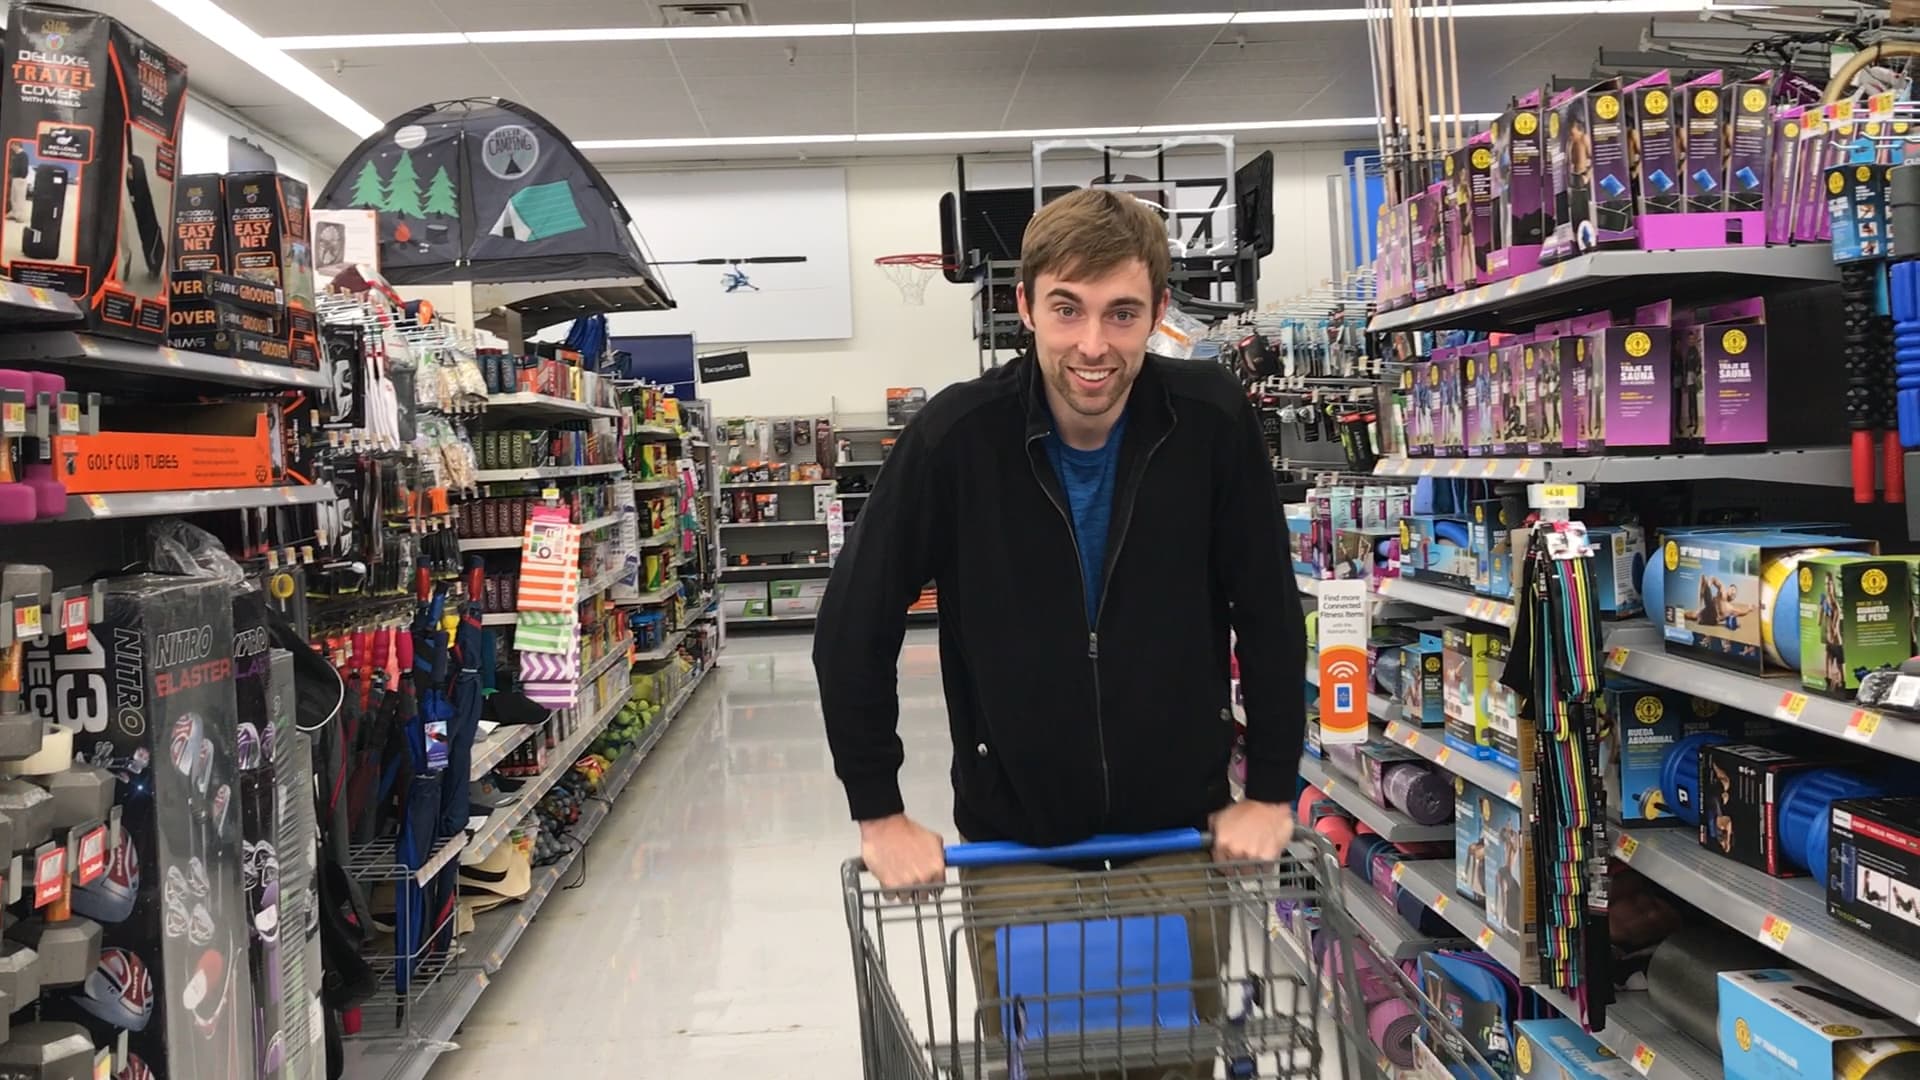 30-year-old's company makes millions selling Walmart buys on